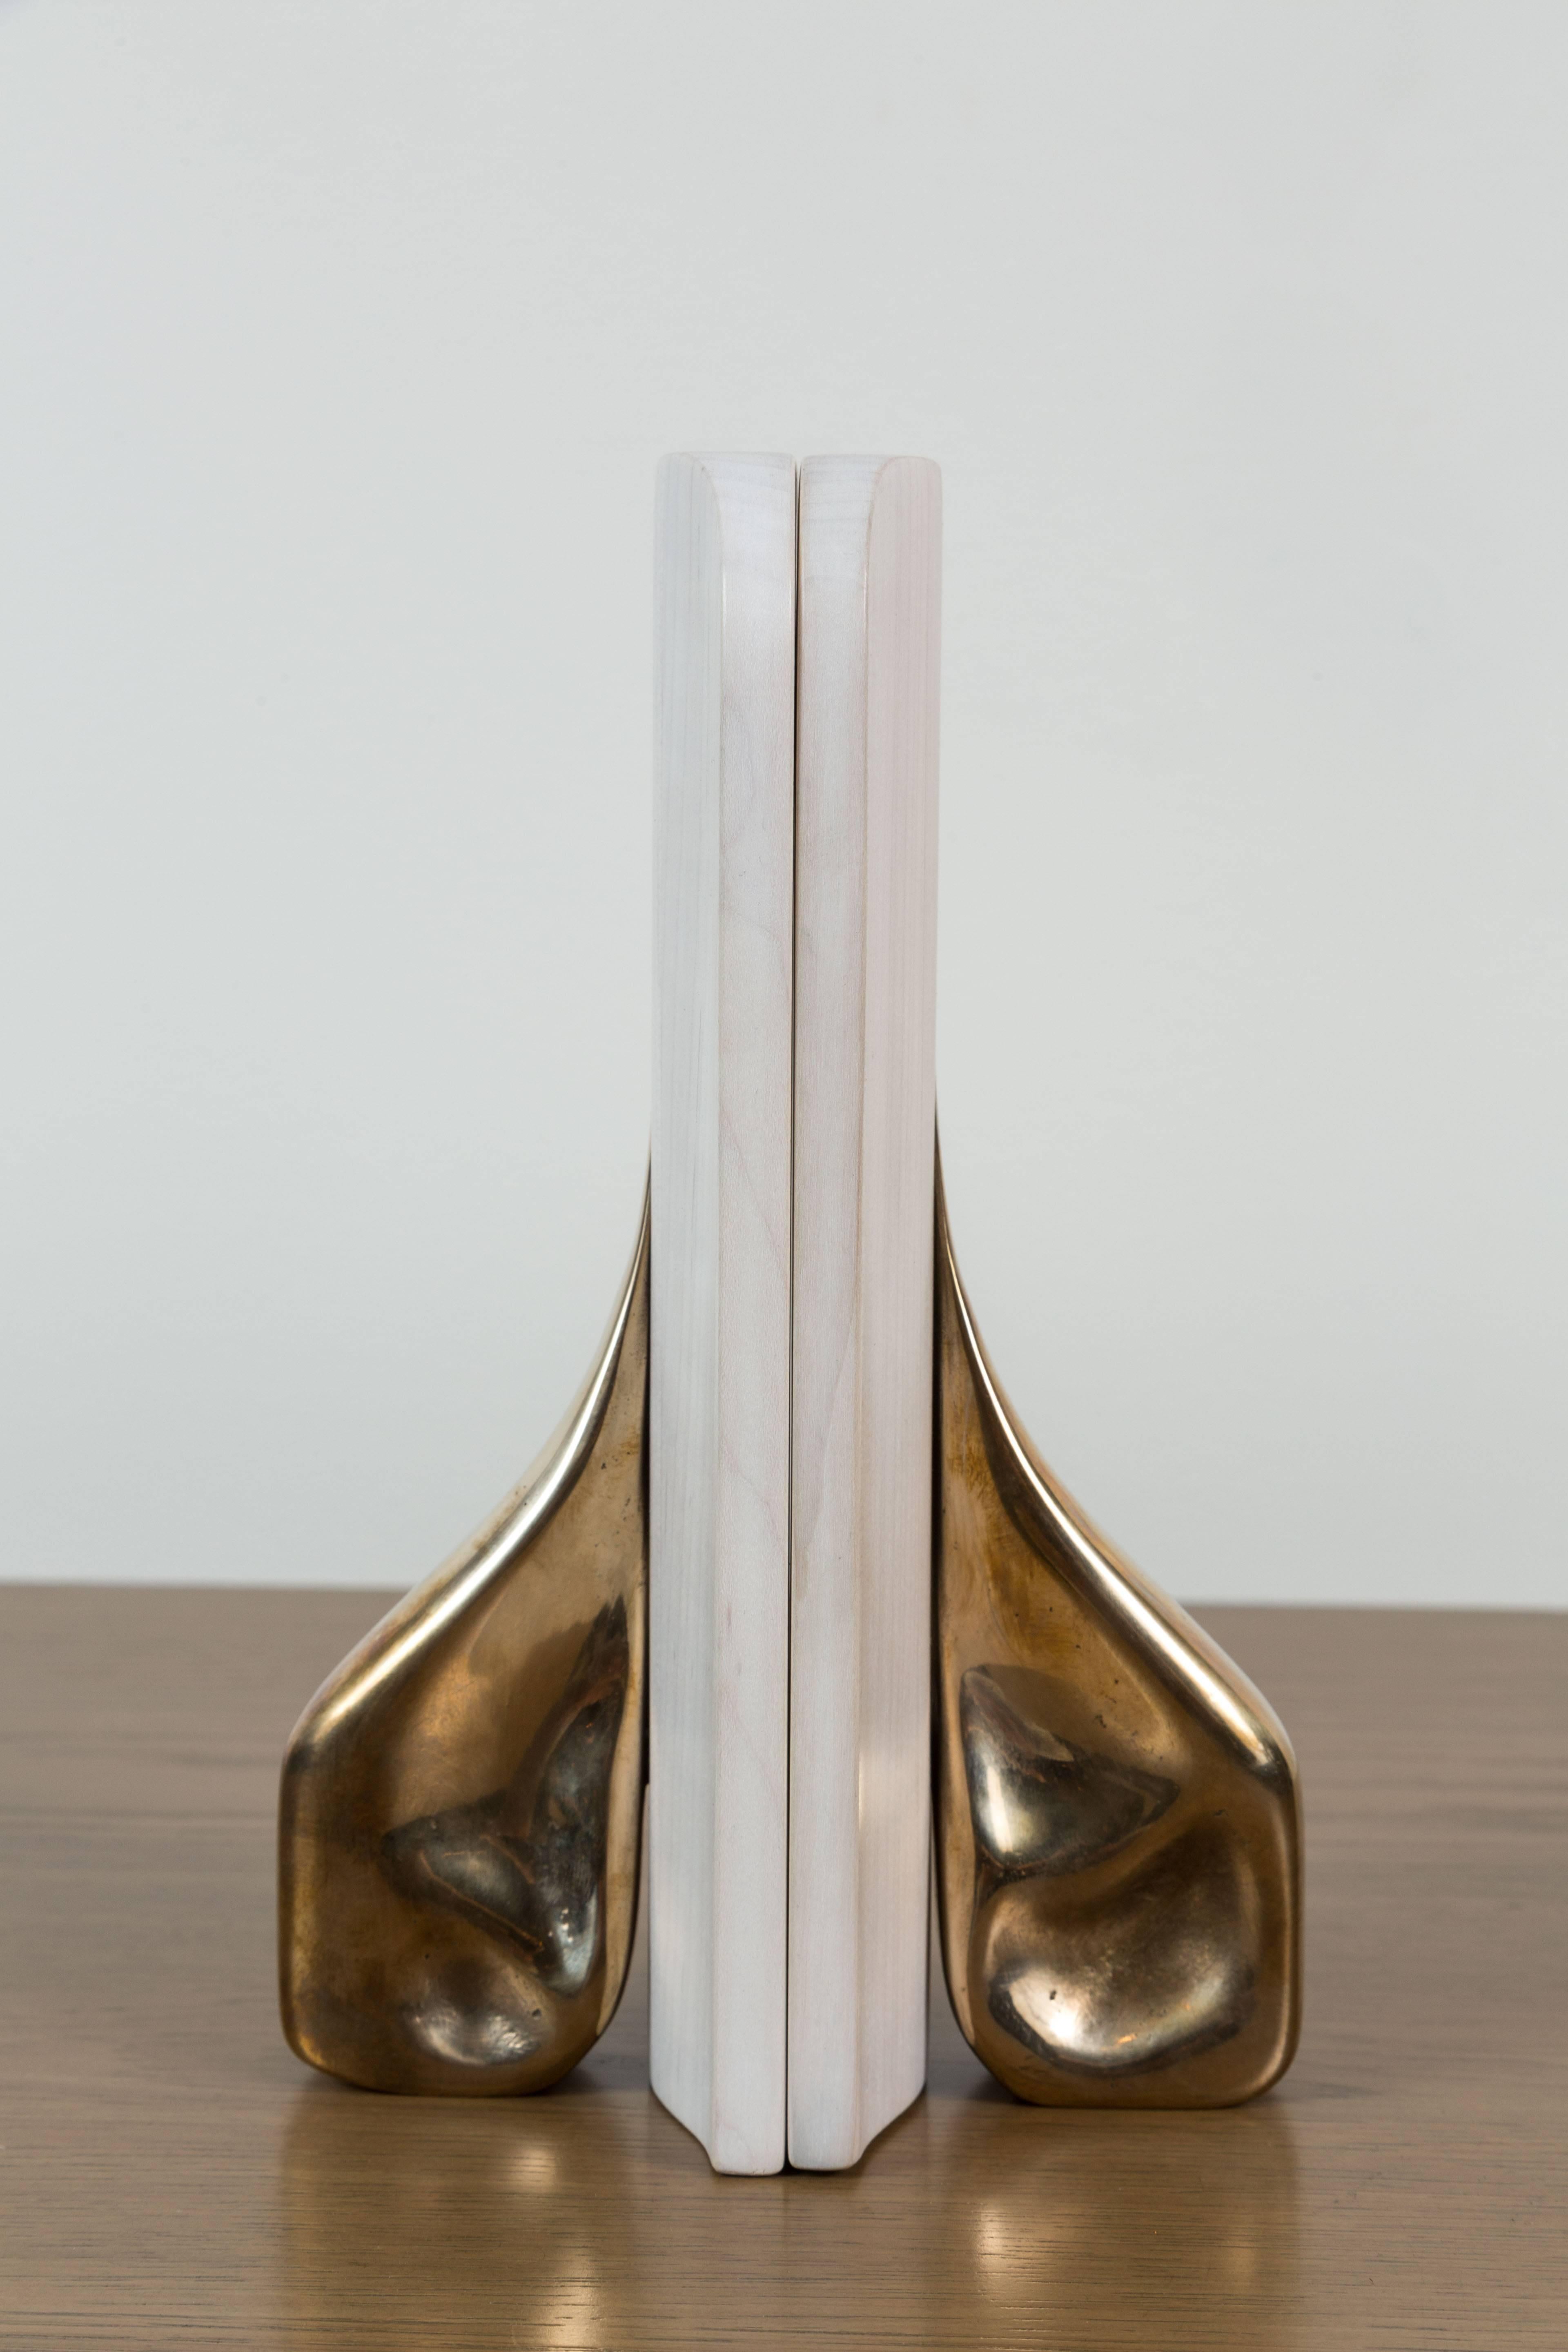 Pair of Bleached Maple and Cast Bronze Bookends by artist Vincent Pocsik in collaboration with Lawson-Fenning. Made of natural materials, this decorative object can be accessorized on table top, book shelf, or desk to achieve an organic modern